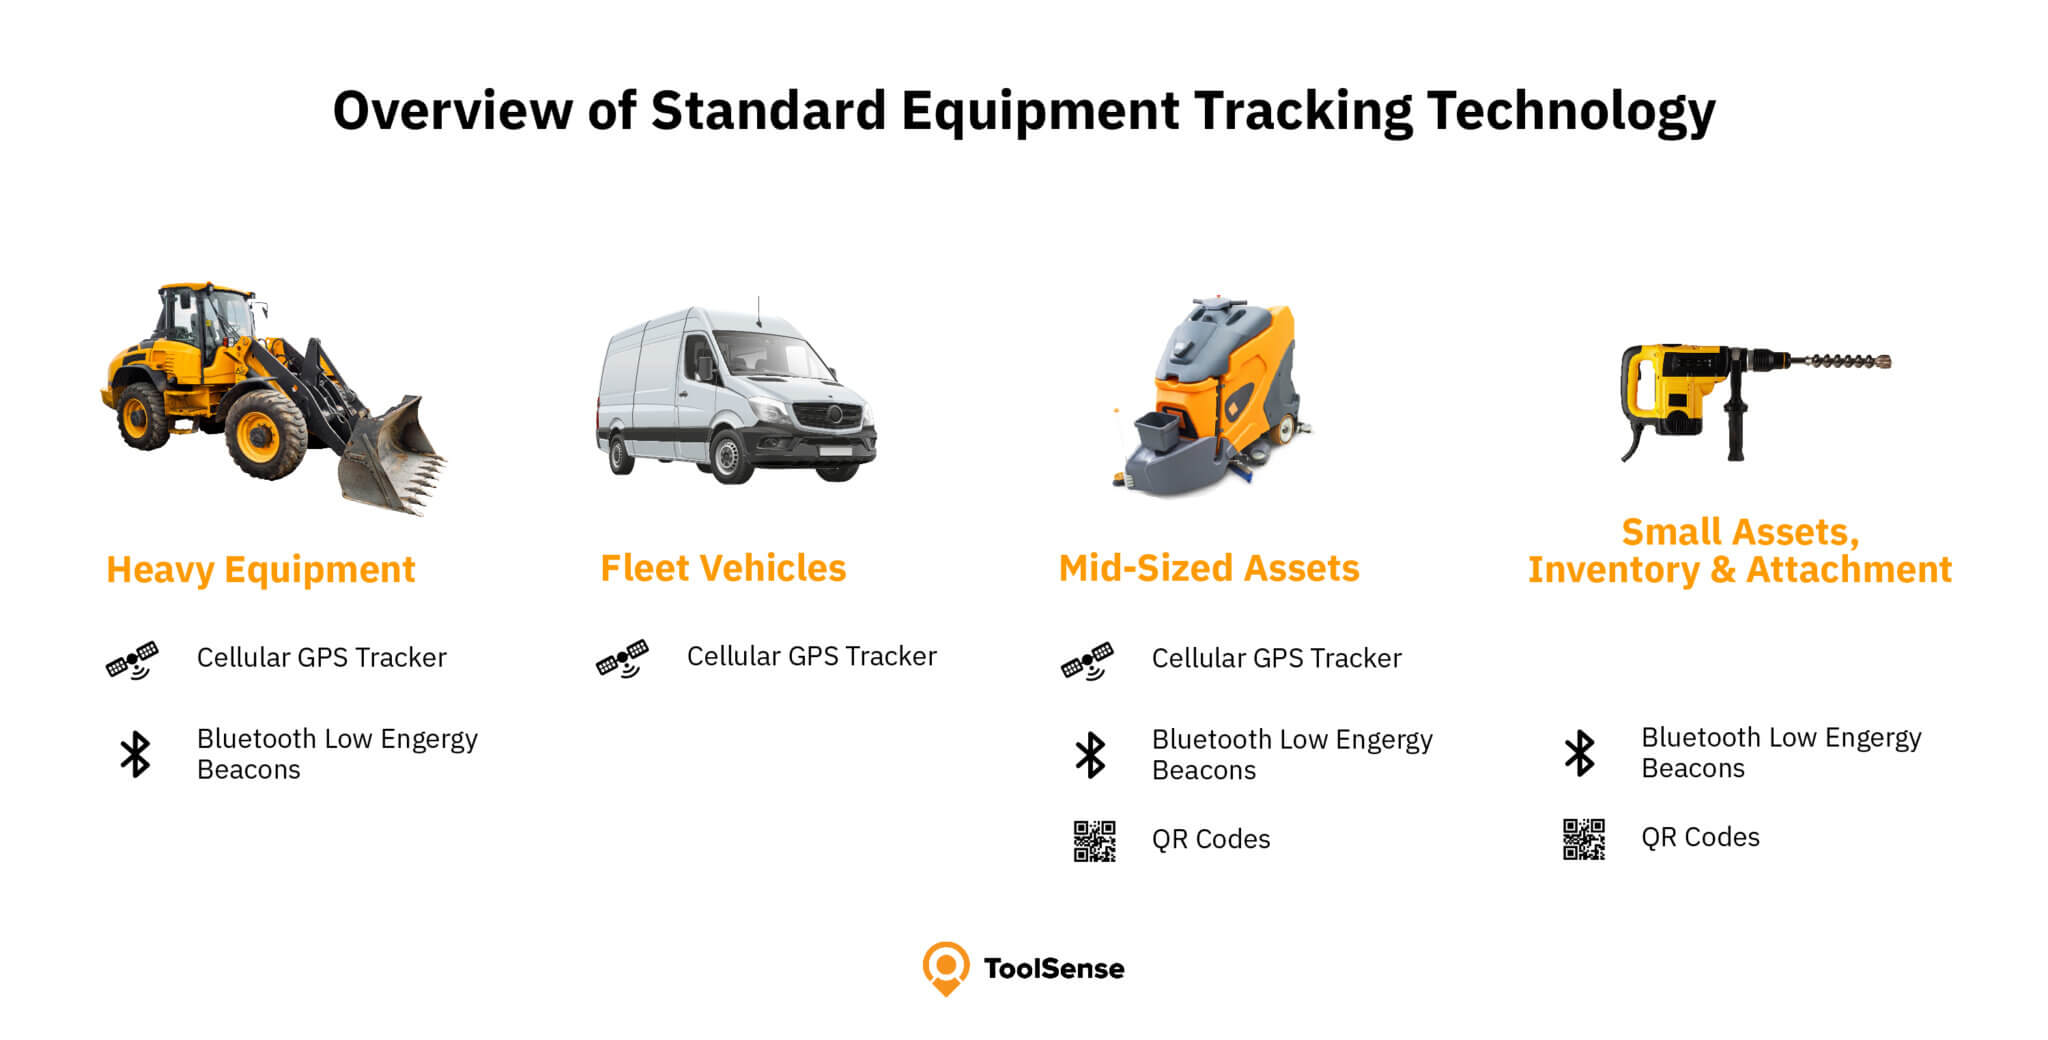 GPS Tracking for Heavy Equipment, Fleet Vehicles, Mid-sized Assets and Small Assets